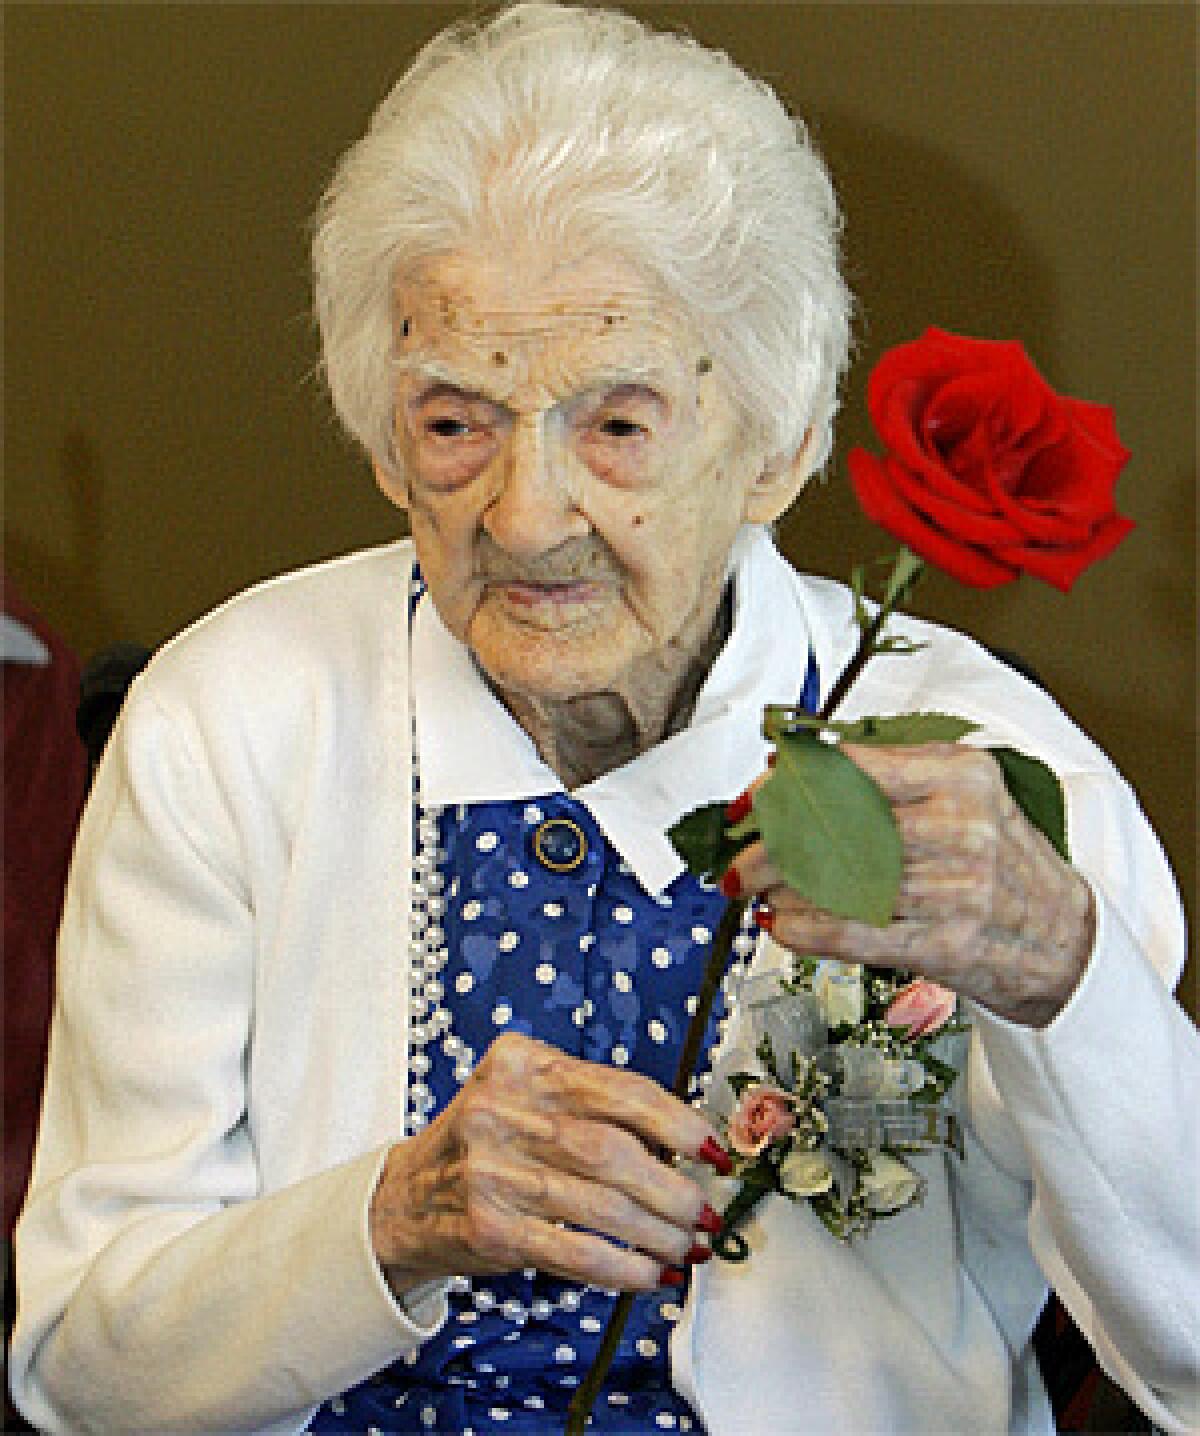 Edna Parker was photographed at her 115th birthday party in Shelbyville, Ind..